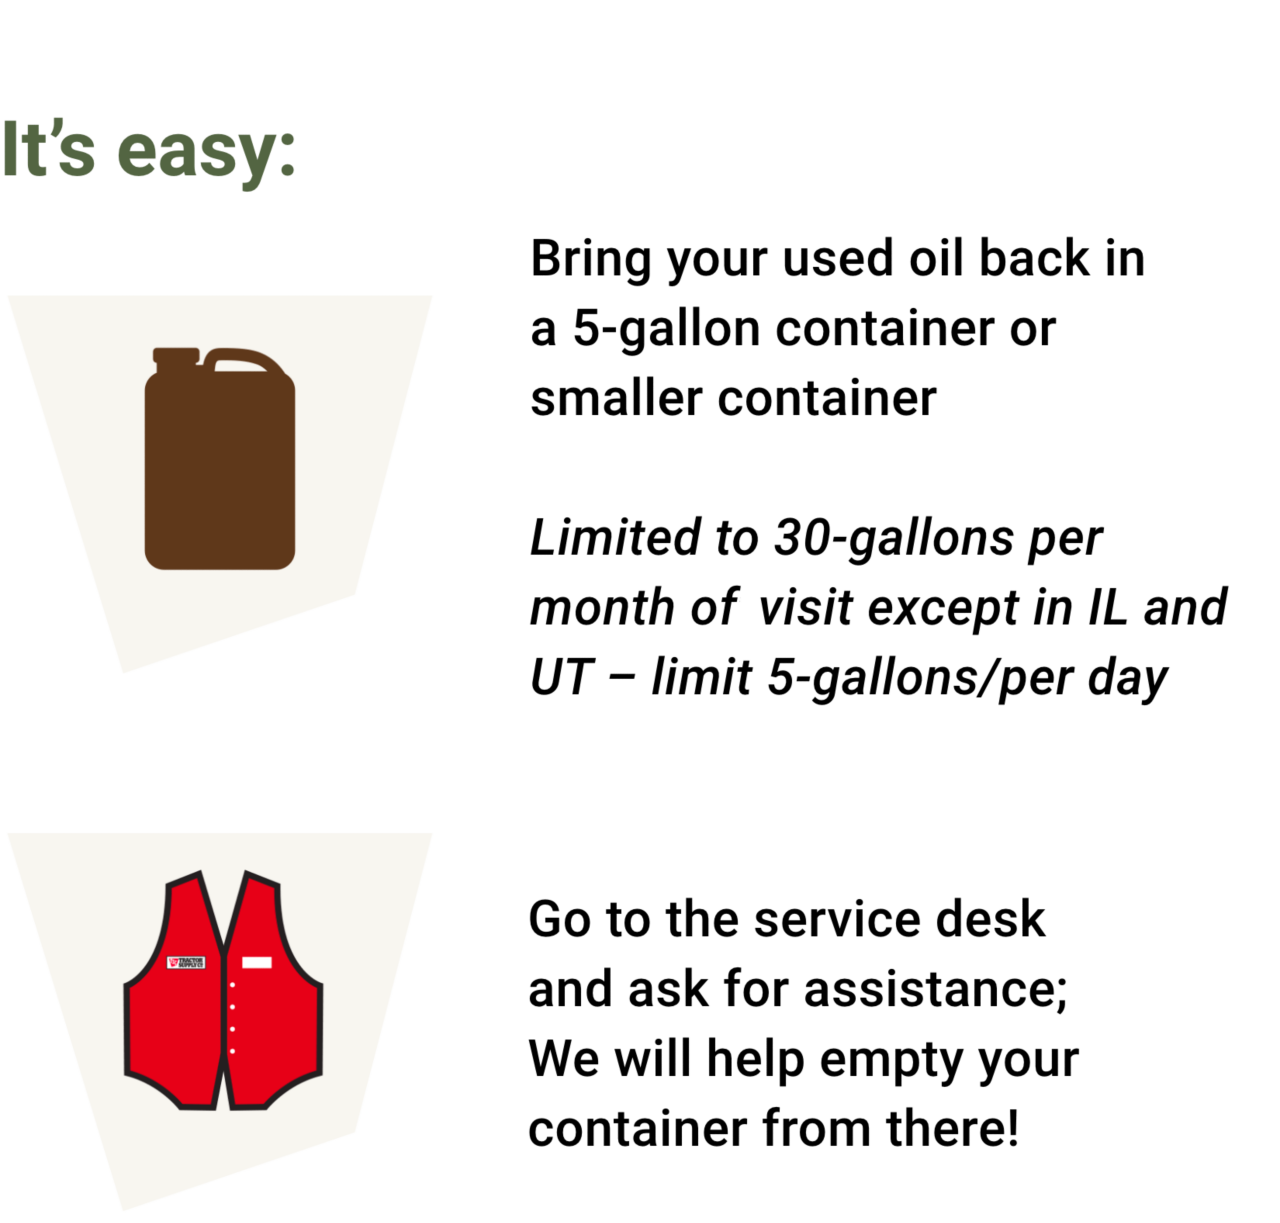 its easy bring your used oil back in a 5 gallon container or smaller container. Limited to 30 gallons per month off visit except in IL and UT limit 5 gallons per day. Go to the service desk and ask for assistance: We will help empty your container from there!